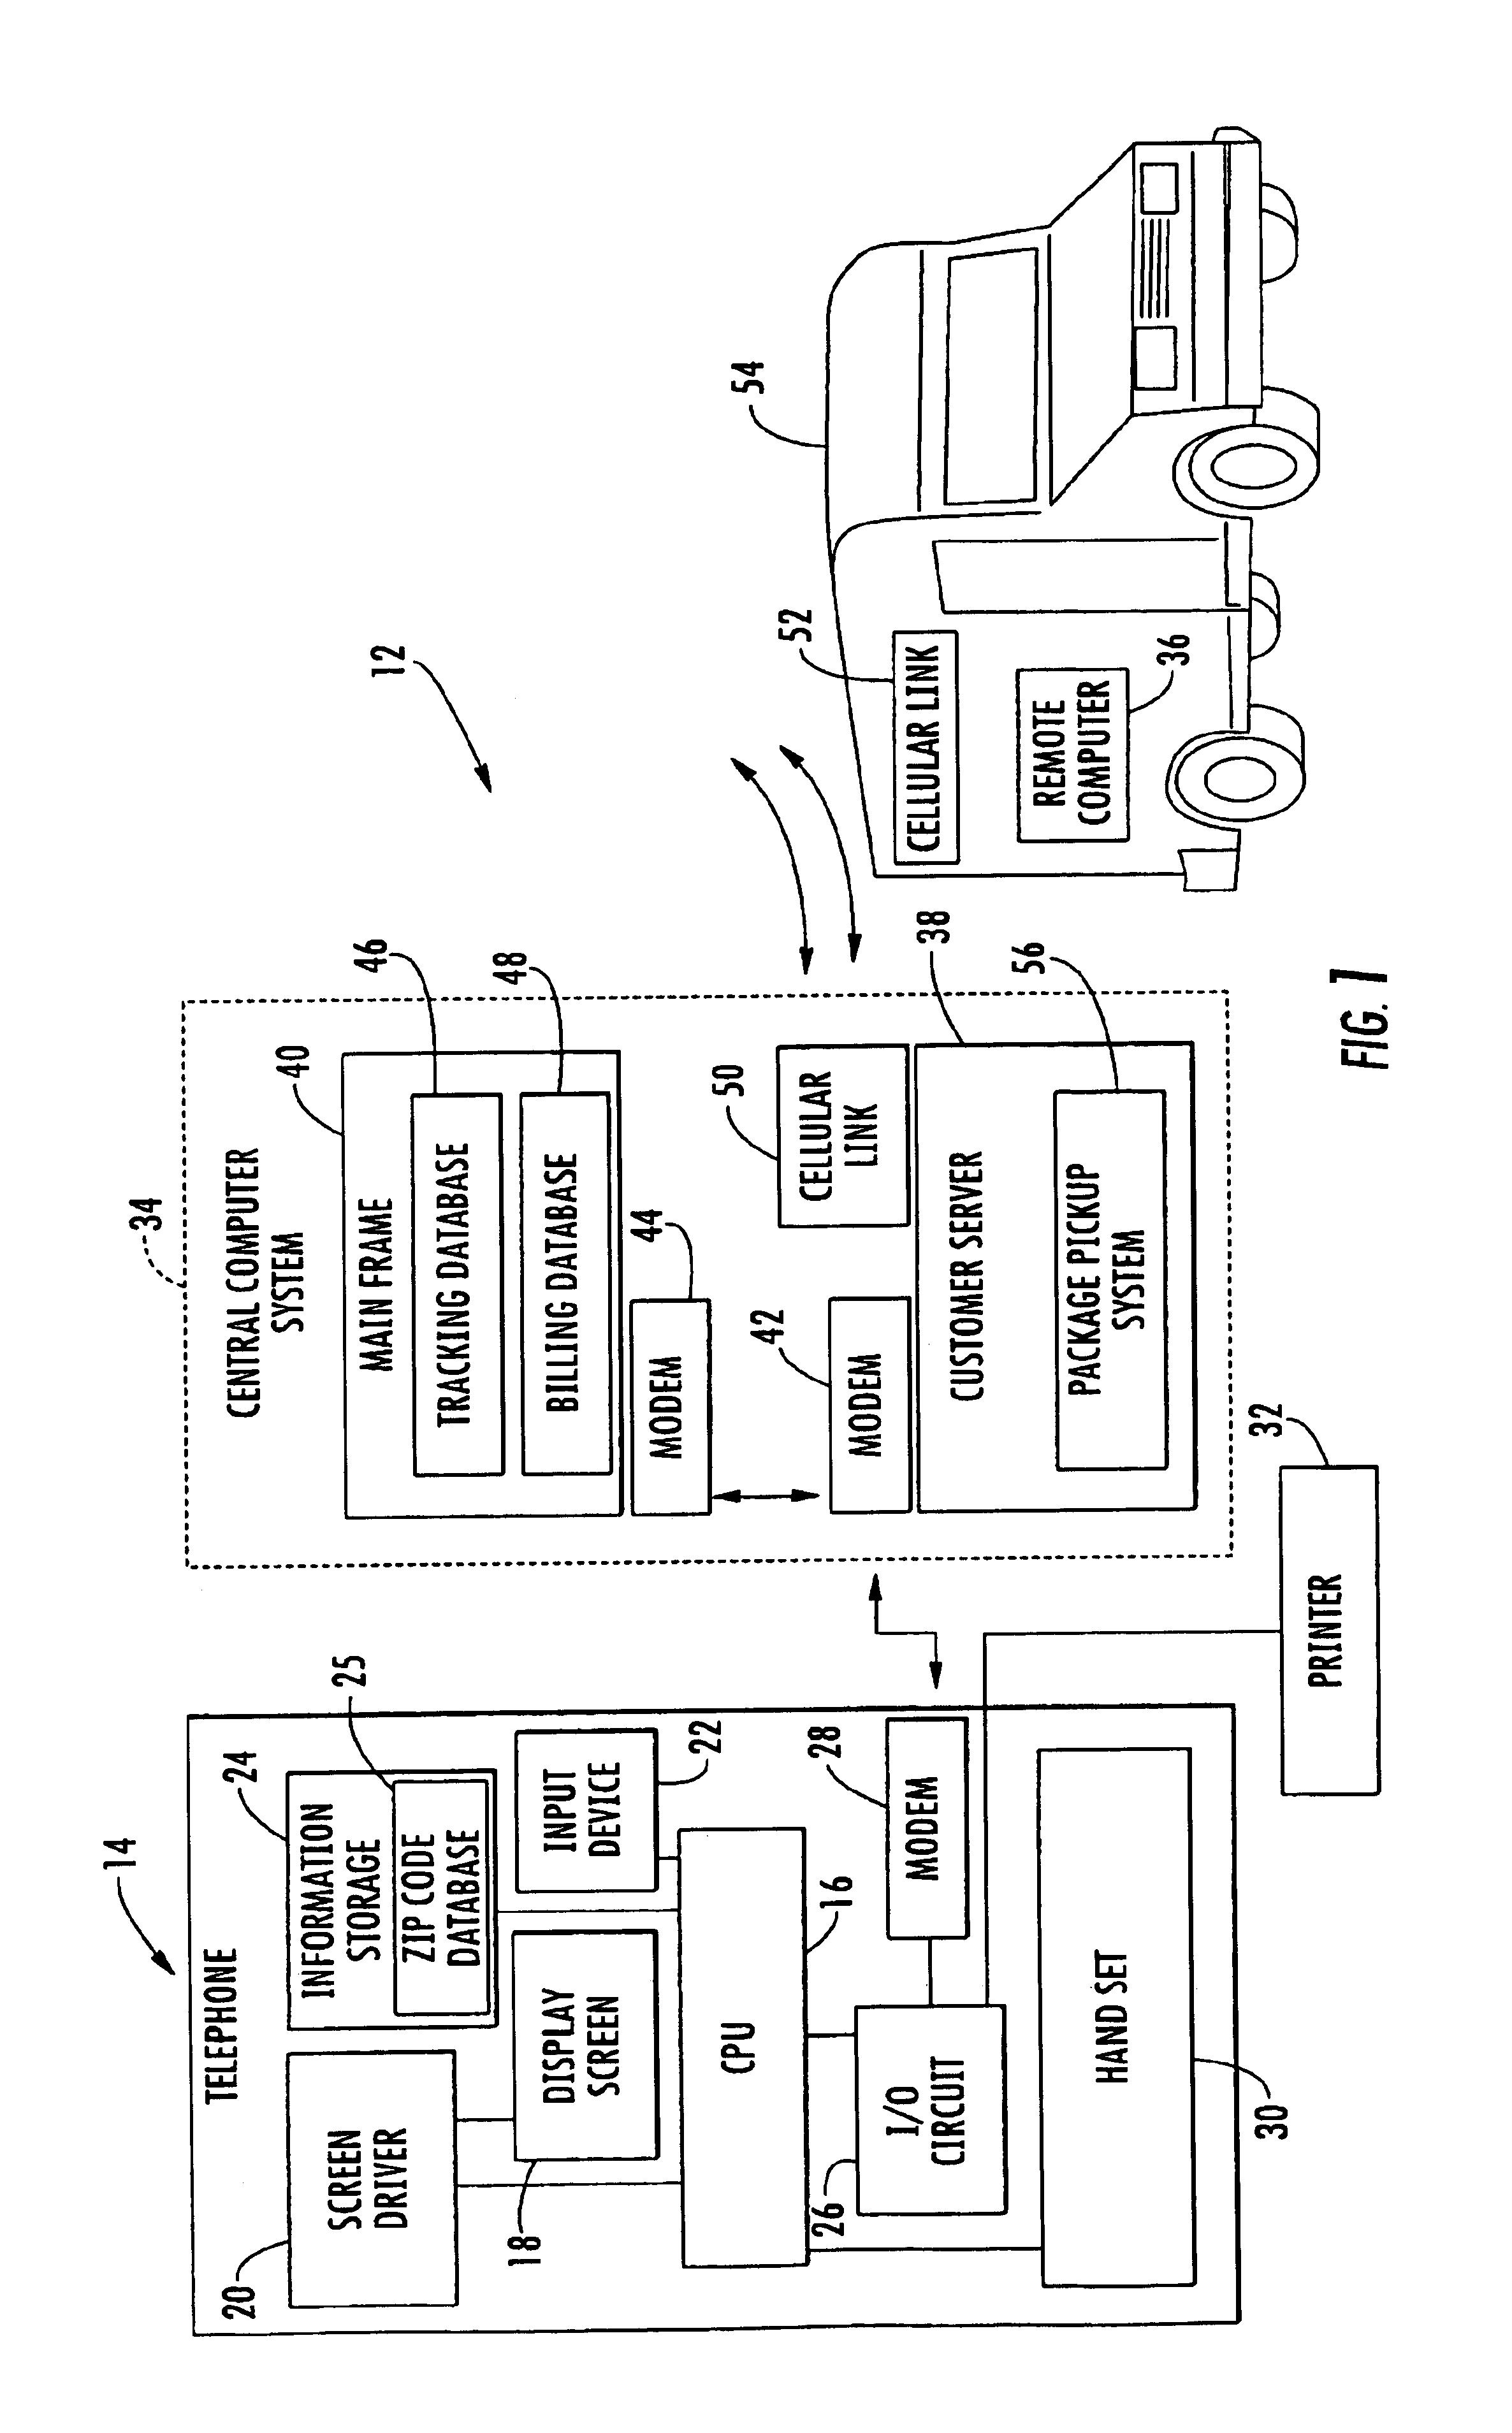 Method and system for preparing an electronic record for shipping a parcel